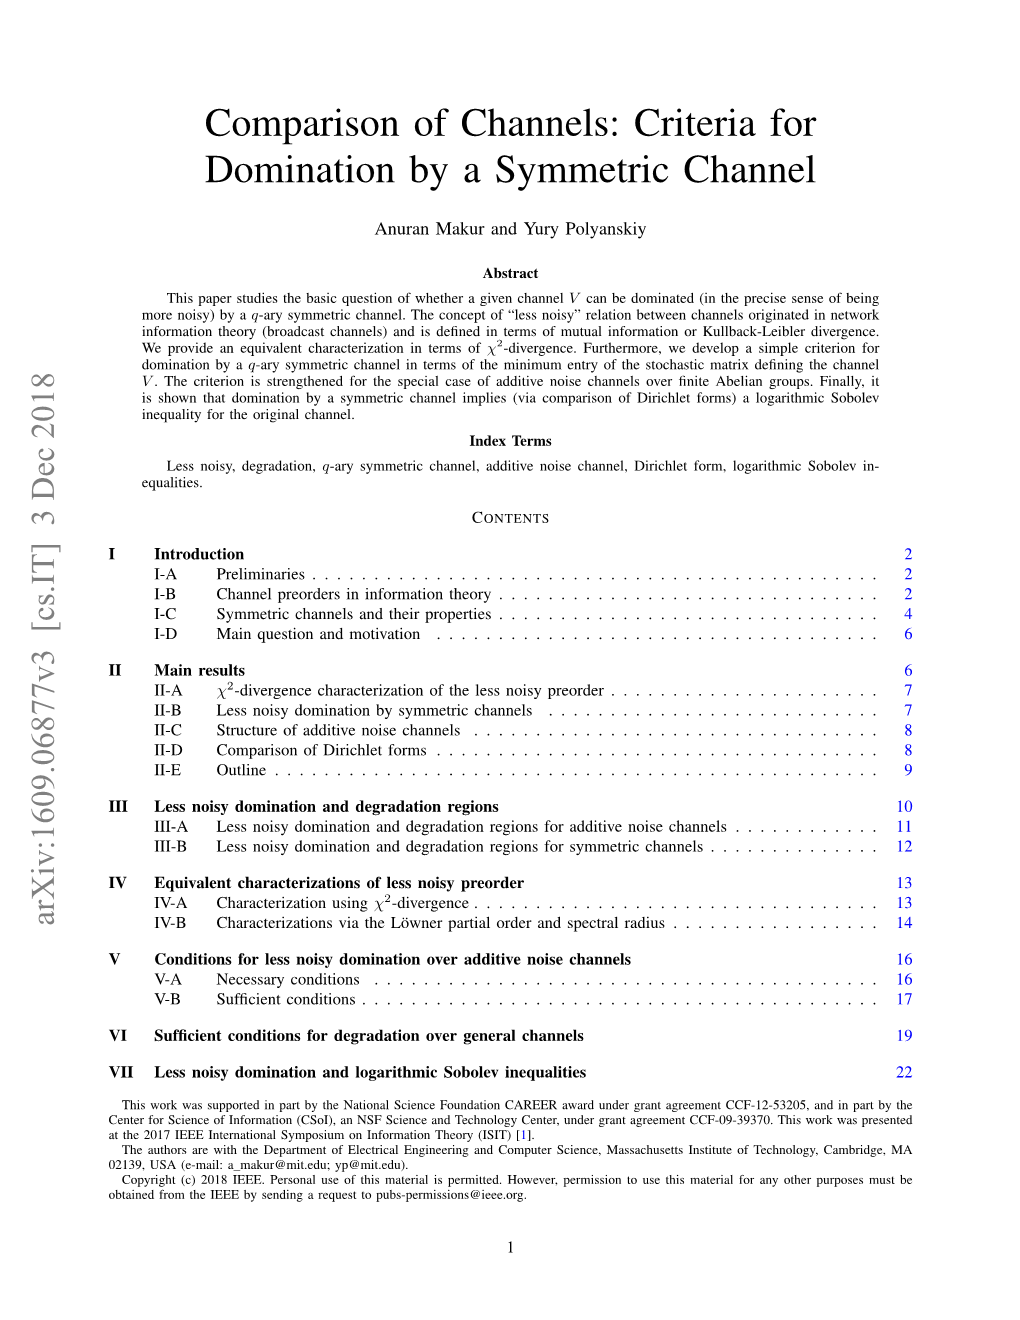 Comparison of Channels: Criteria for Domination by a Symmetric Channel